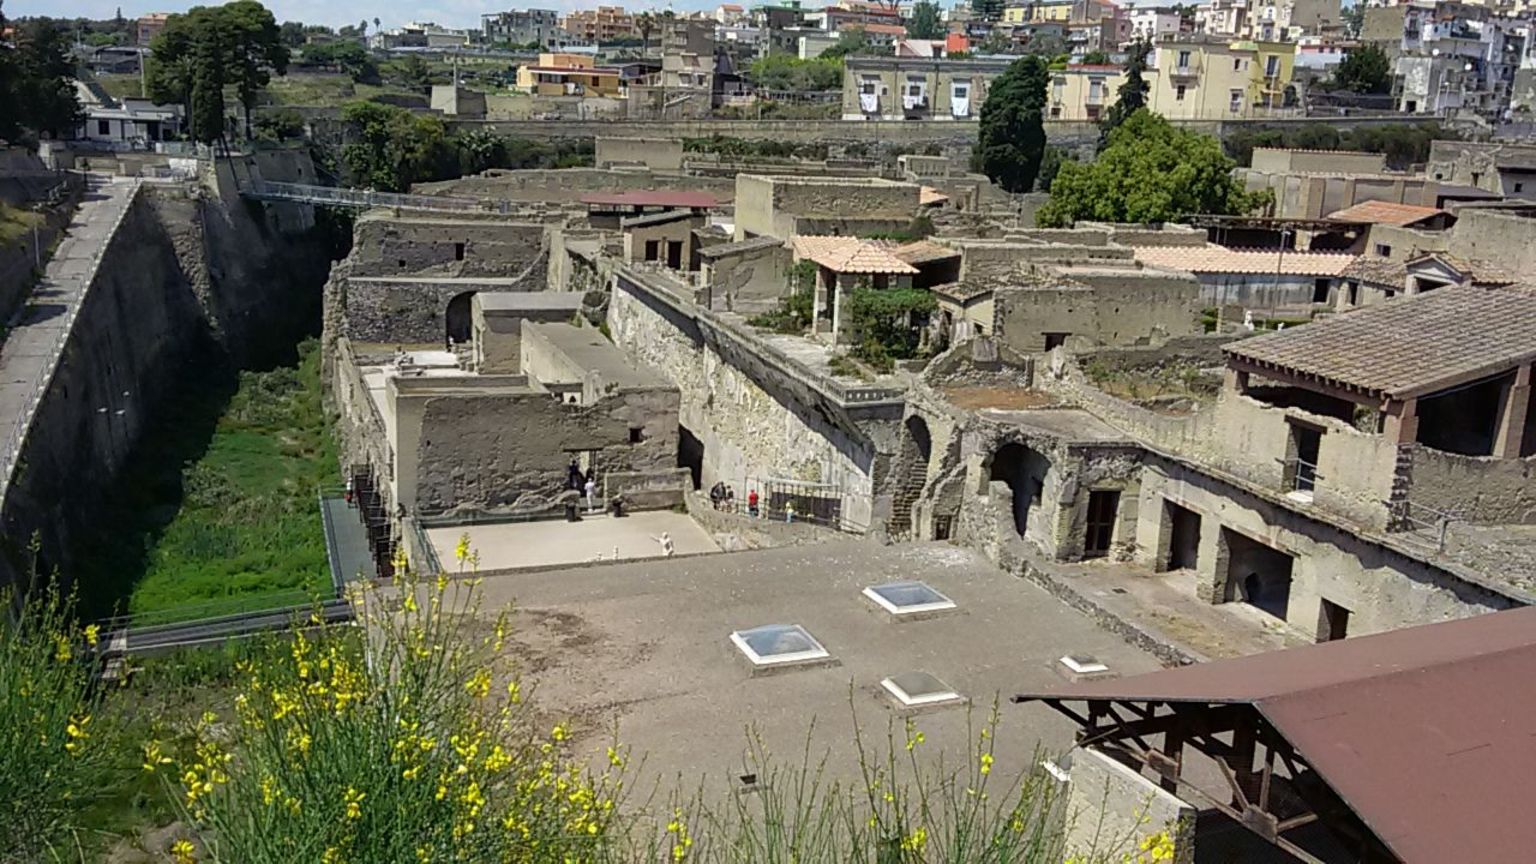 view of Herculaneum from ground level